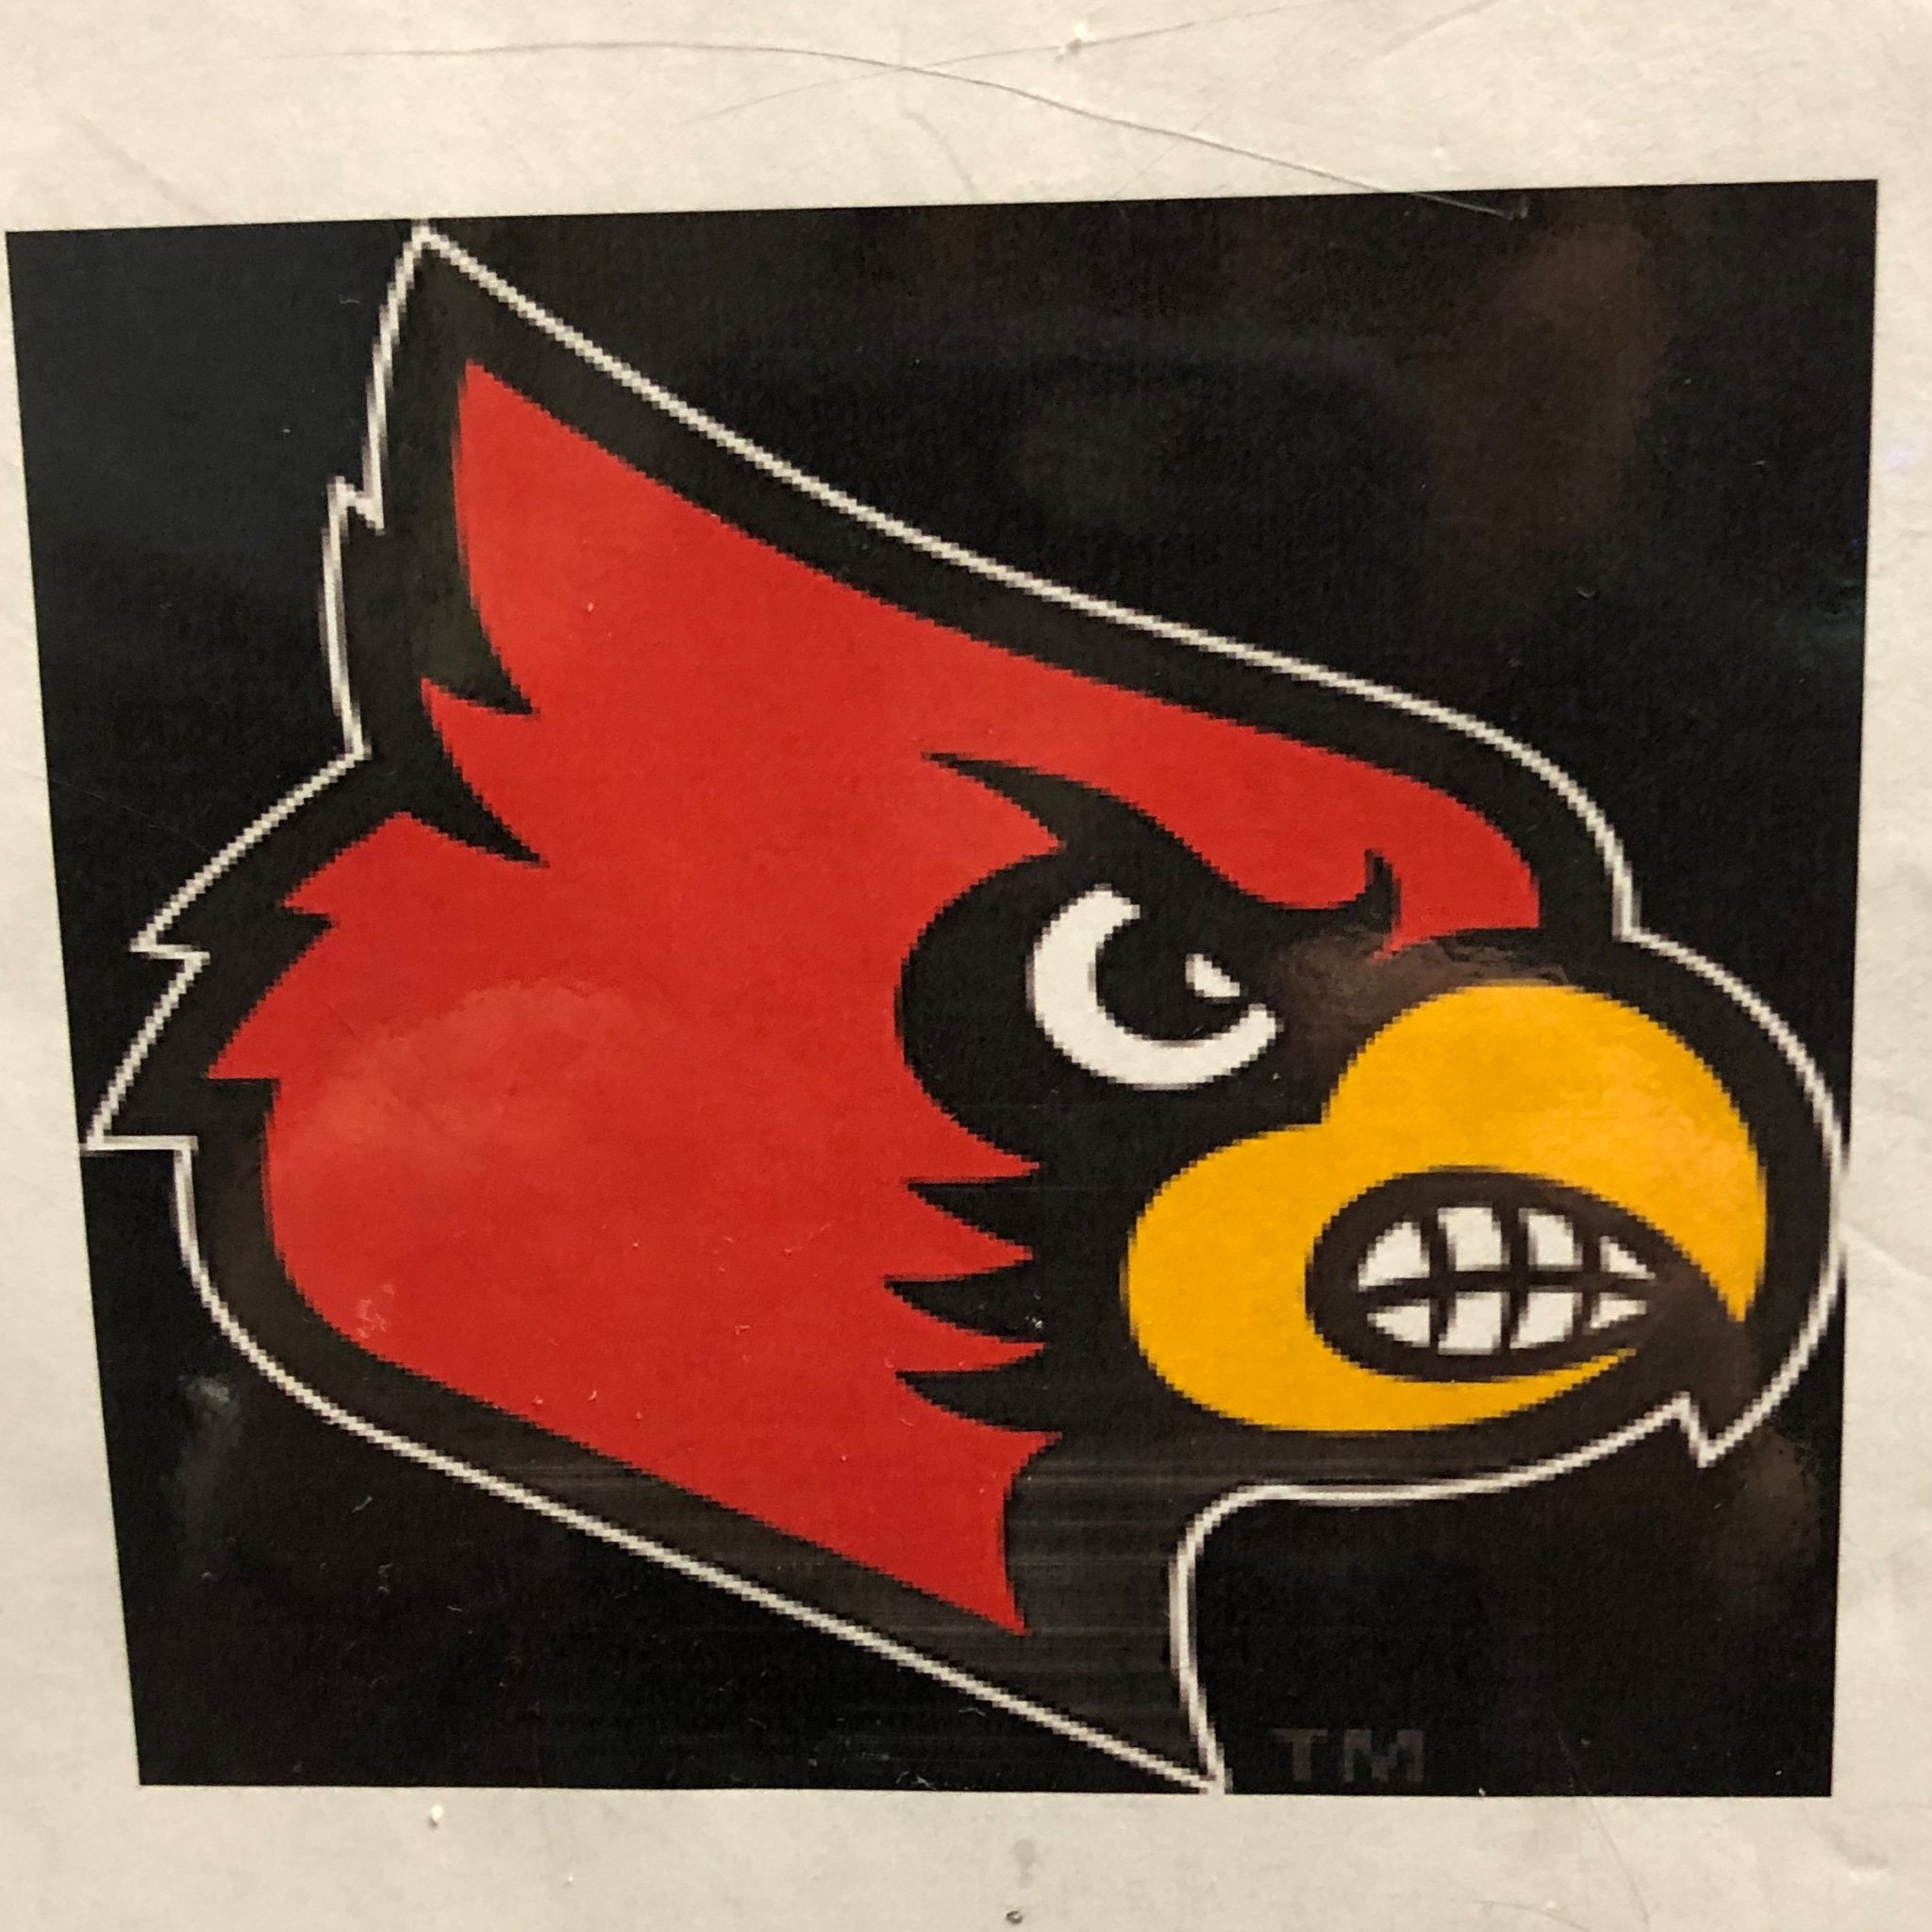 We are the official Brighton High Football Booster Club. 🖤❤️🏈 Go Cardinals